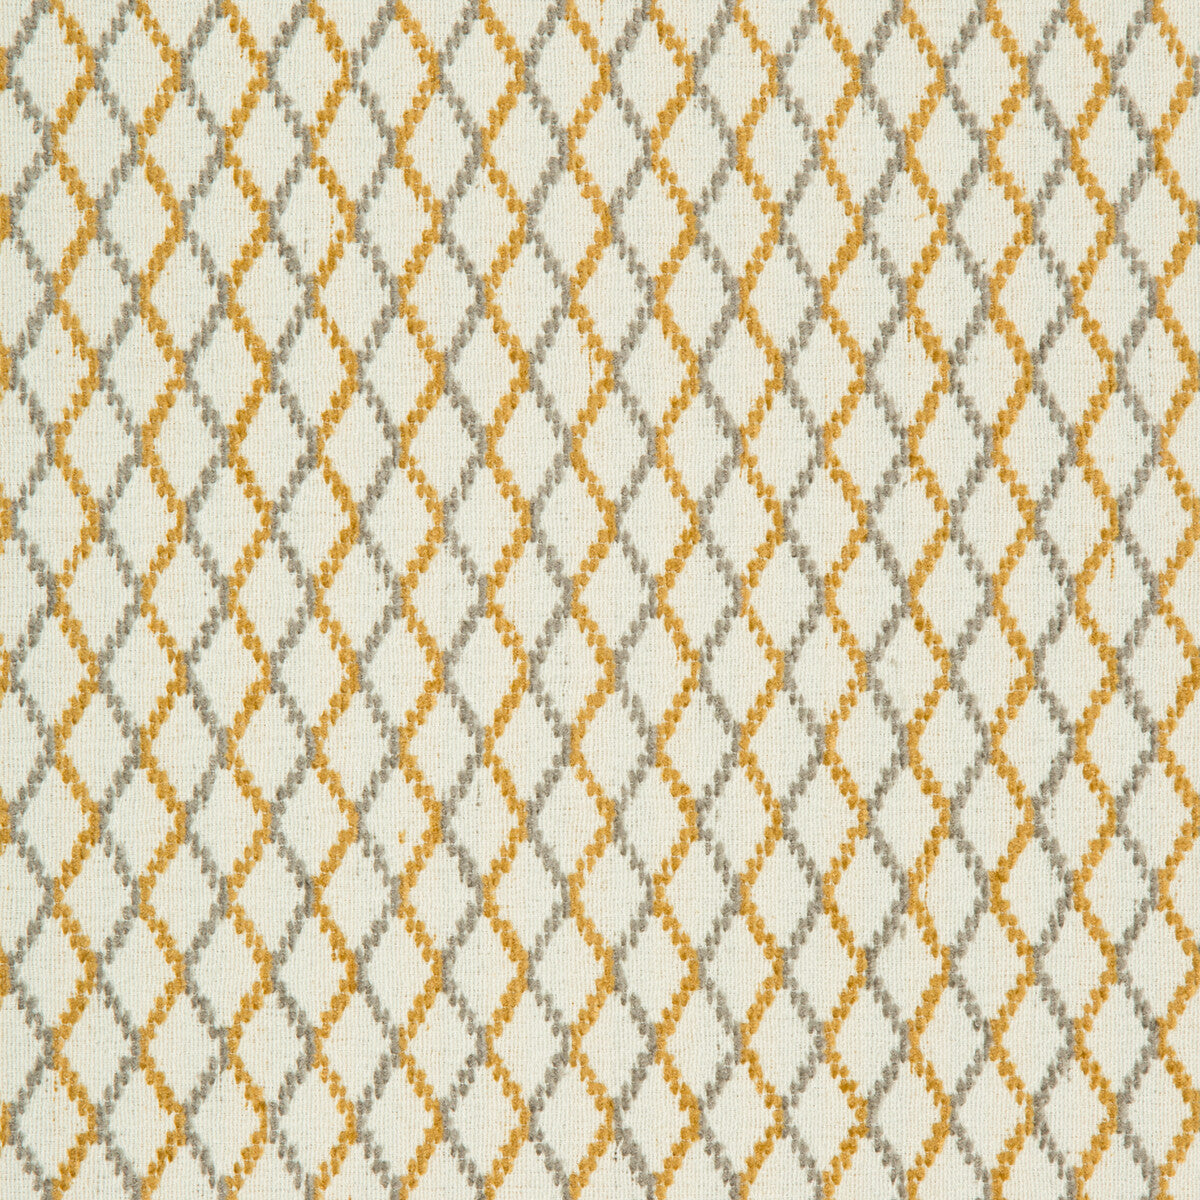 Kravet Design fabric in 34695-411 color - pattern 34695.411.0 - by Kravet Design in the Crypton Home collection